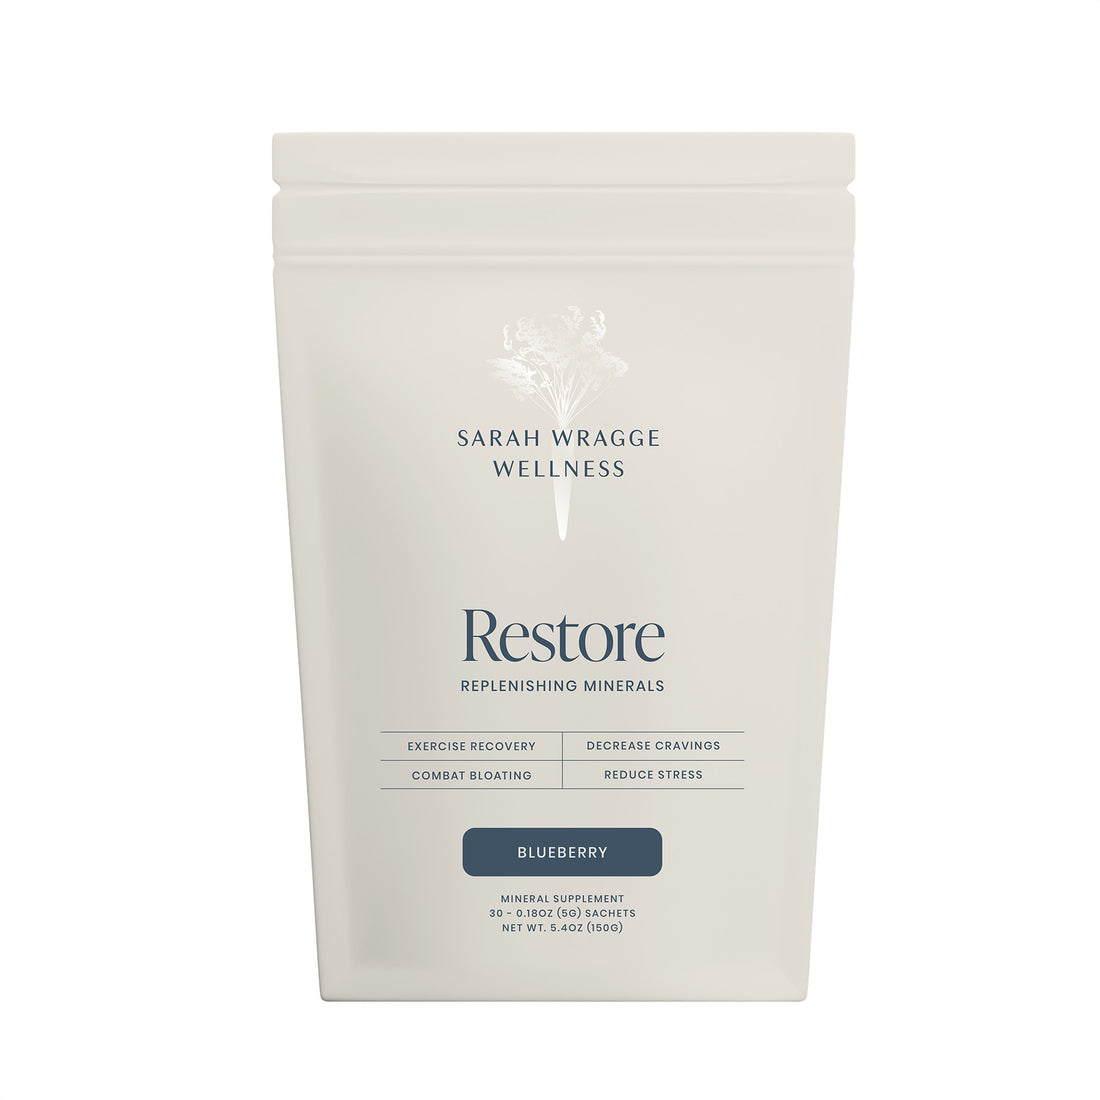 SWW® Restore - Replenishing Minerals Front of Packaging